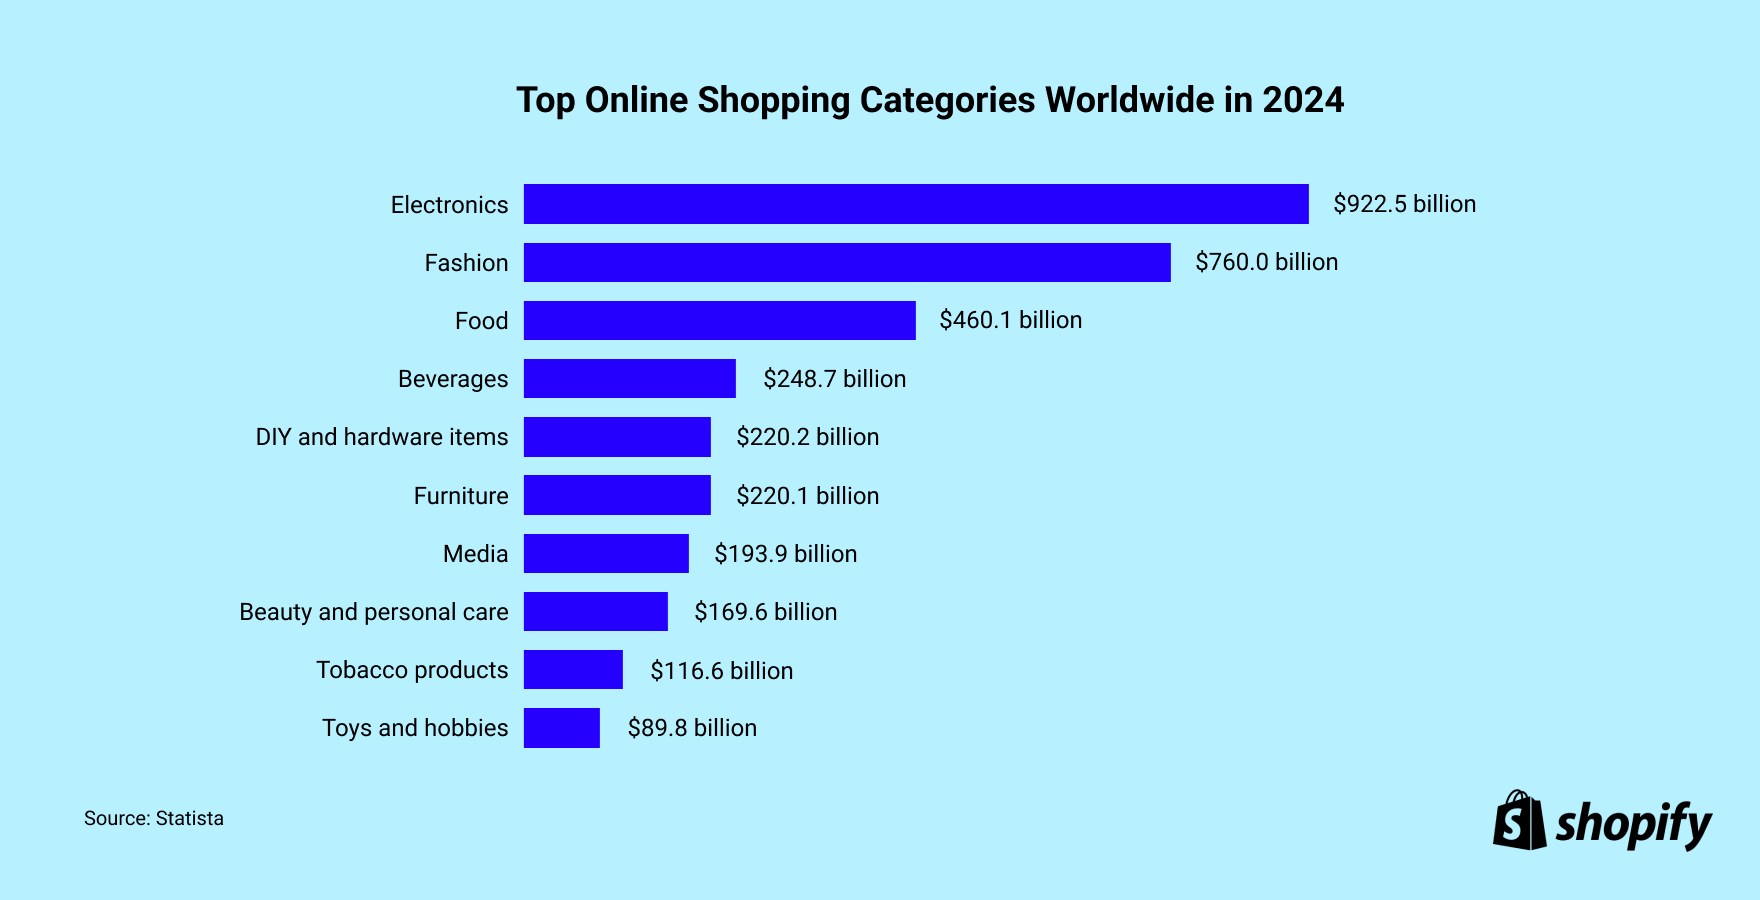 Chart showing the top online shopping categories in 2024, with electronics ranking in first place.